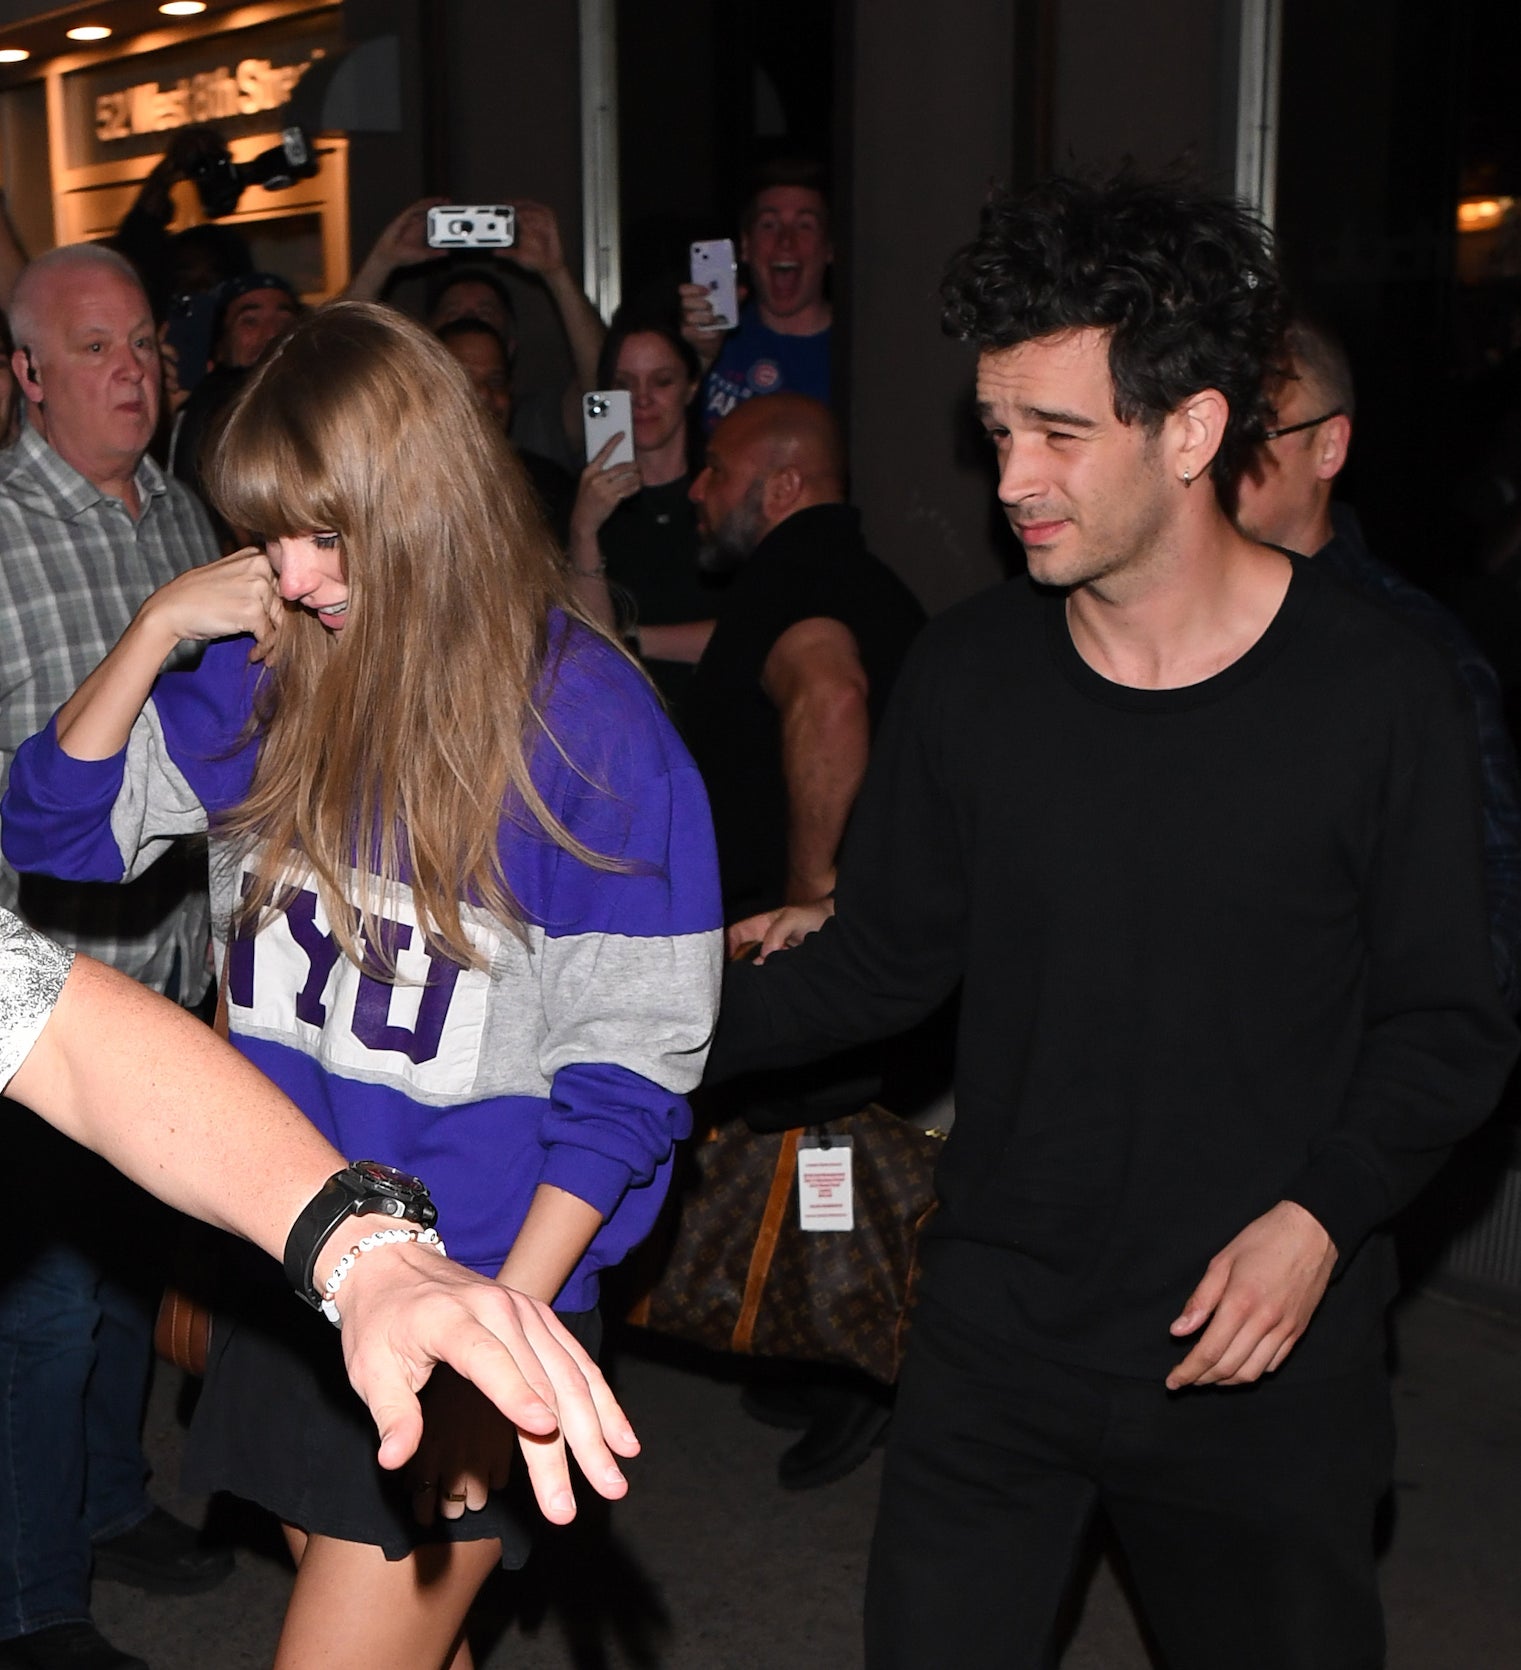 Taylor Swift in a casual top exits a building with Matty Healy